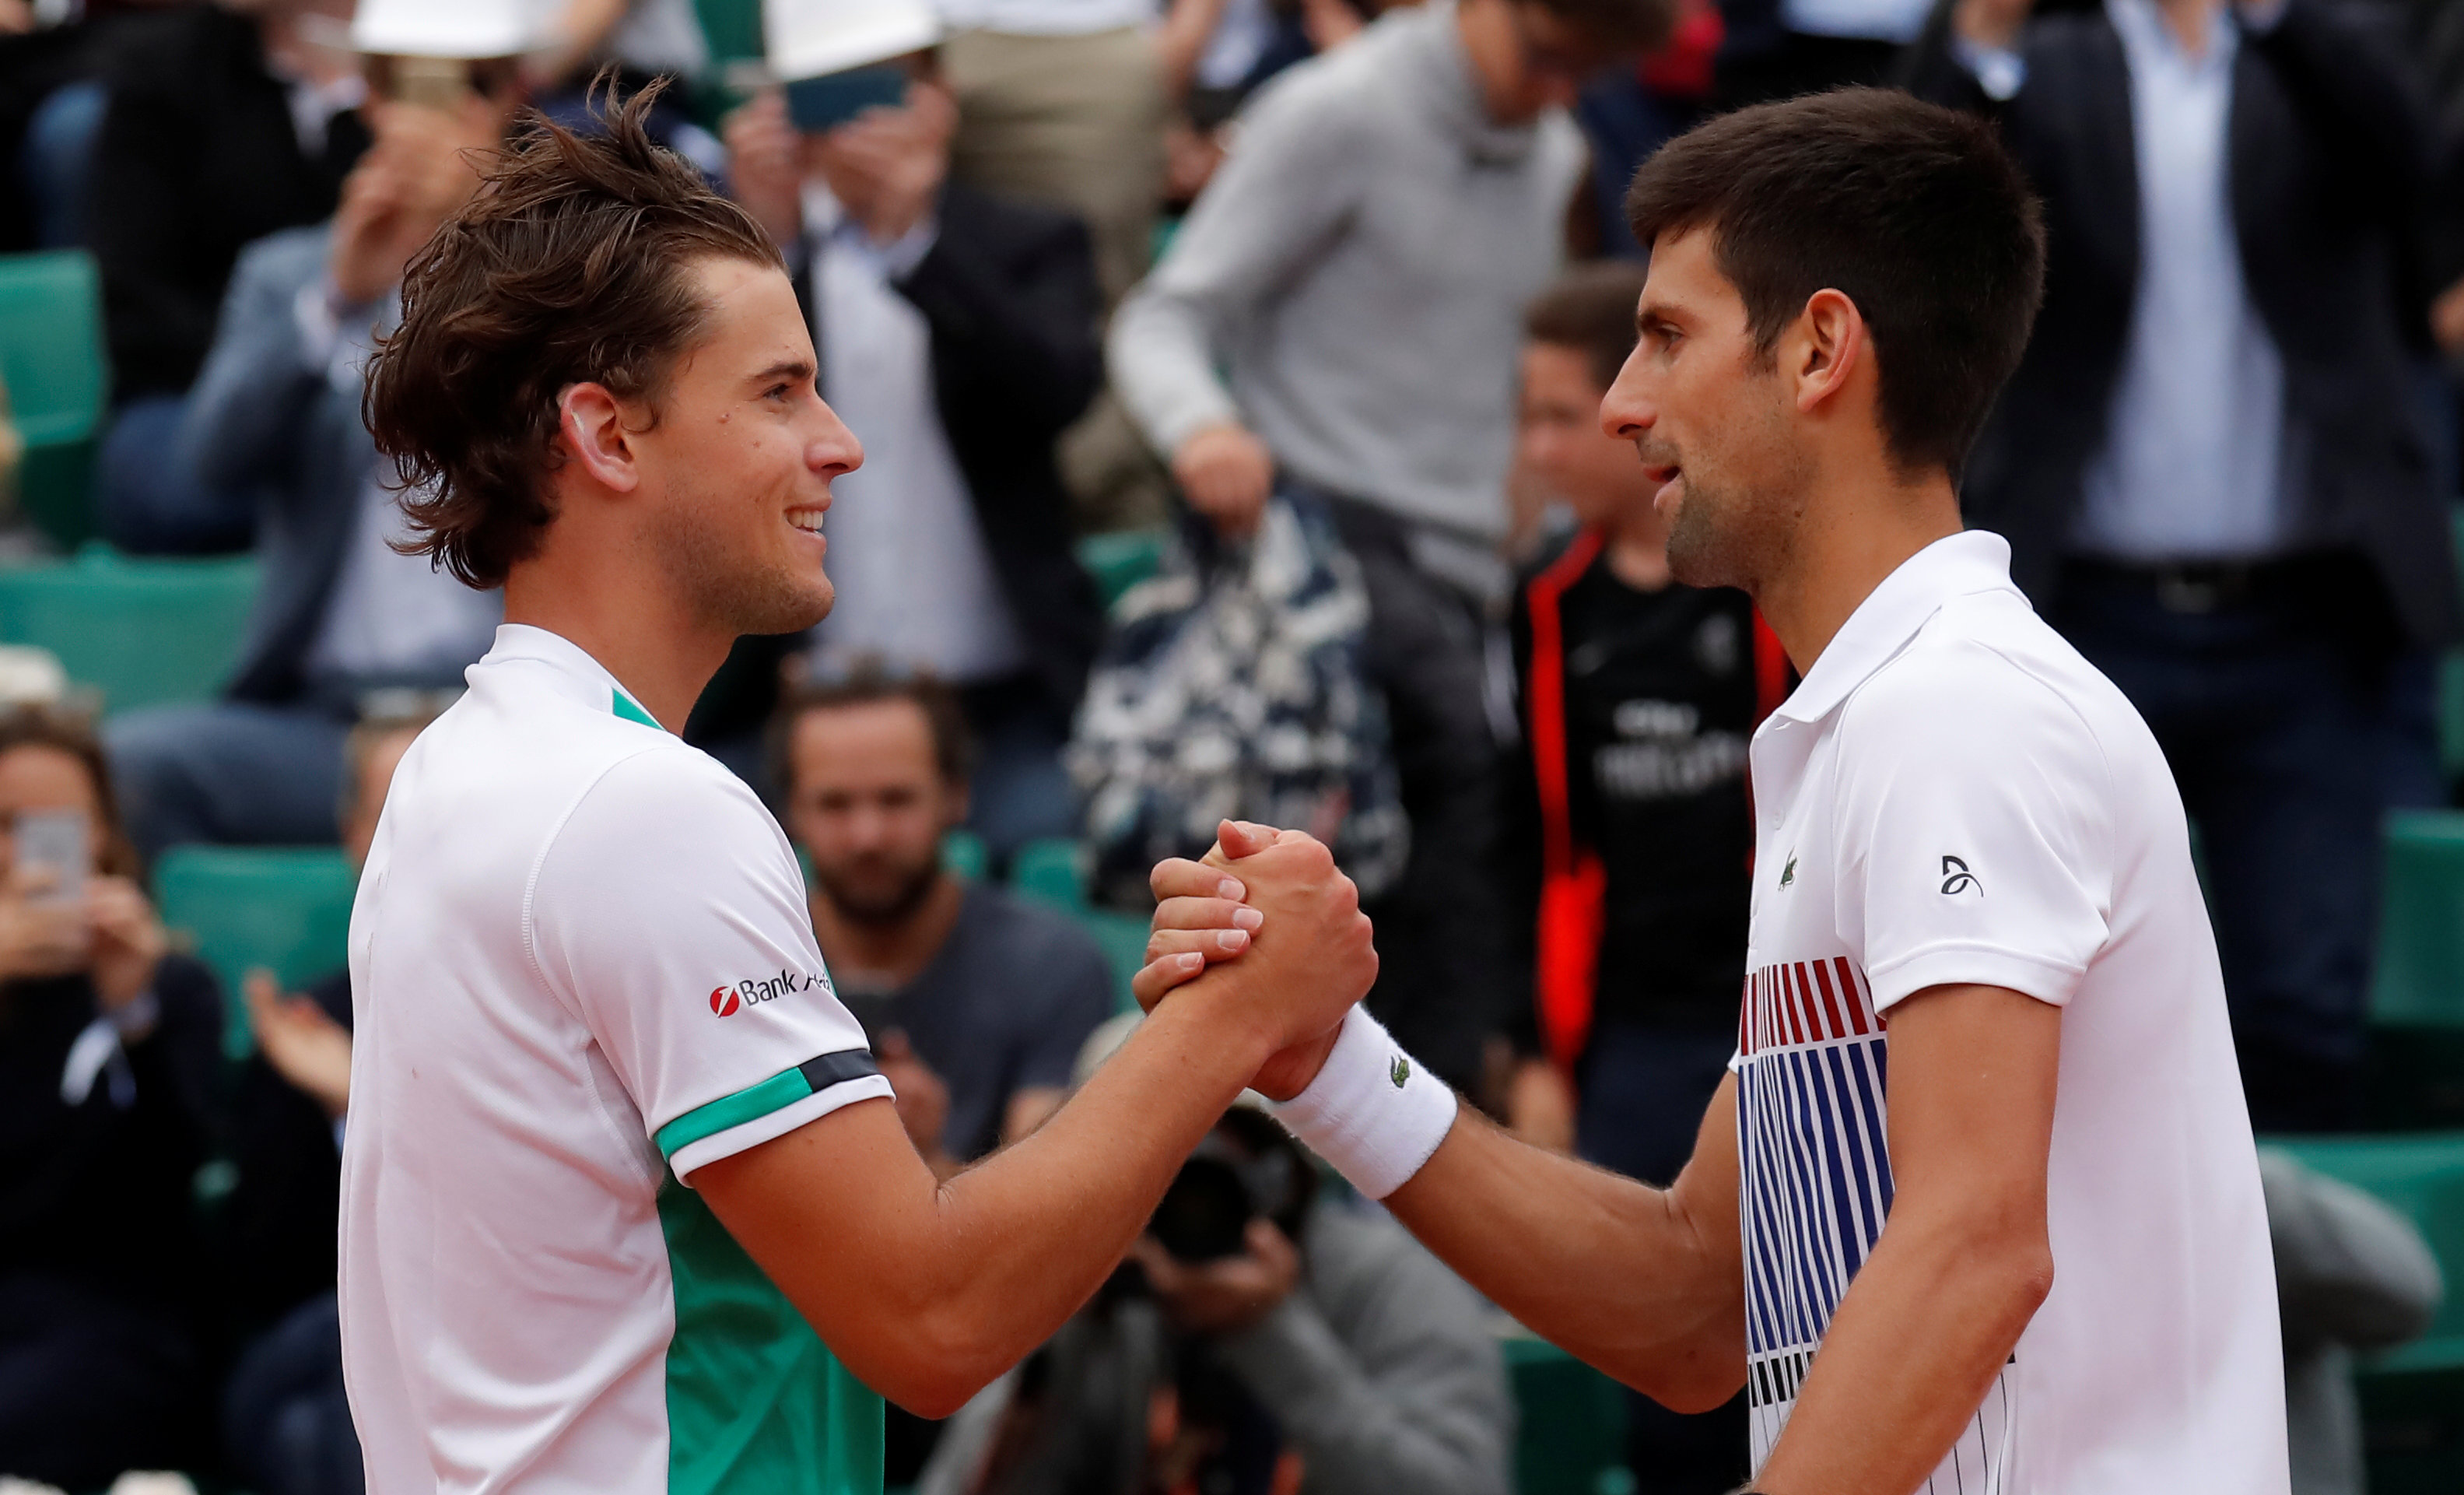 Tennis: Djokovic knocked out of French Open by Dominic Thiem